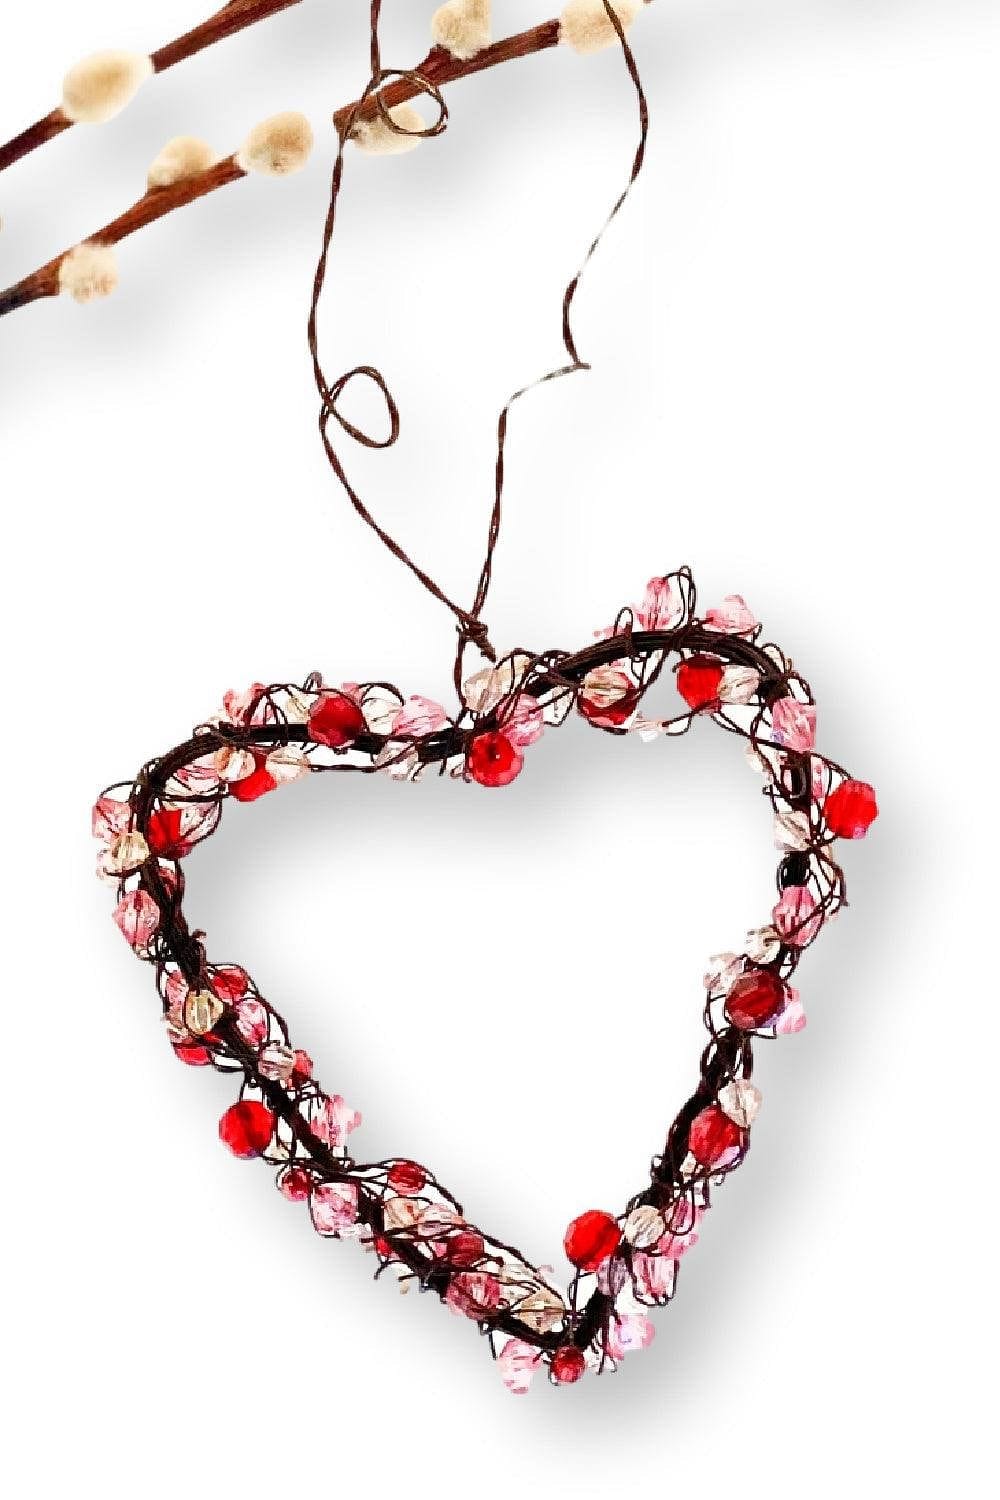 Pink Jeweled Wired Heart Ornaments